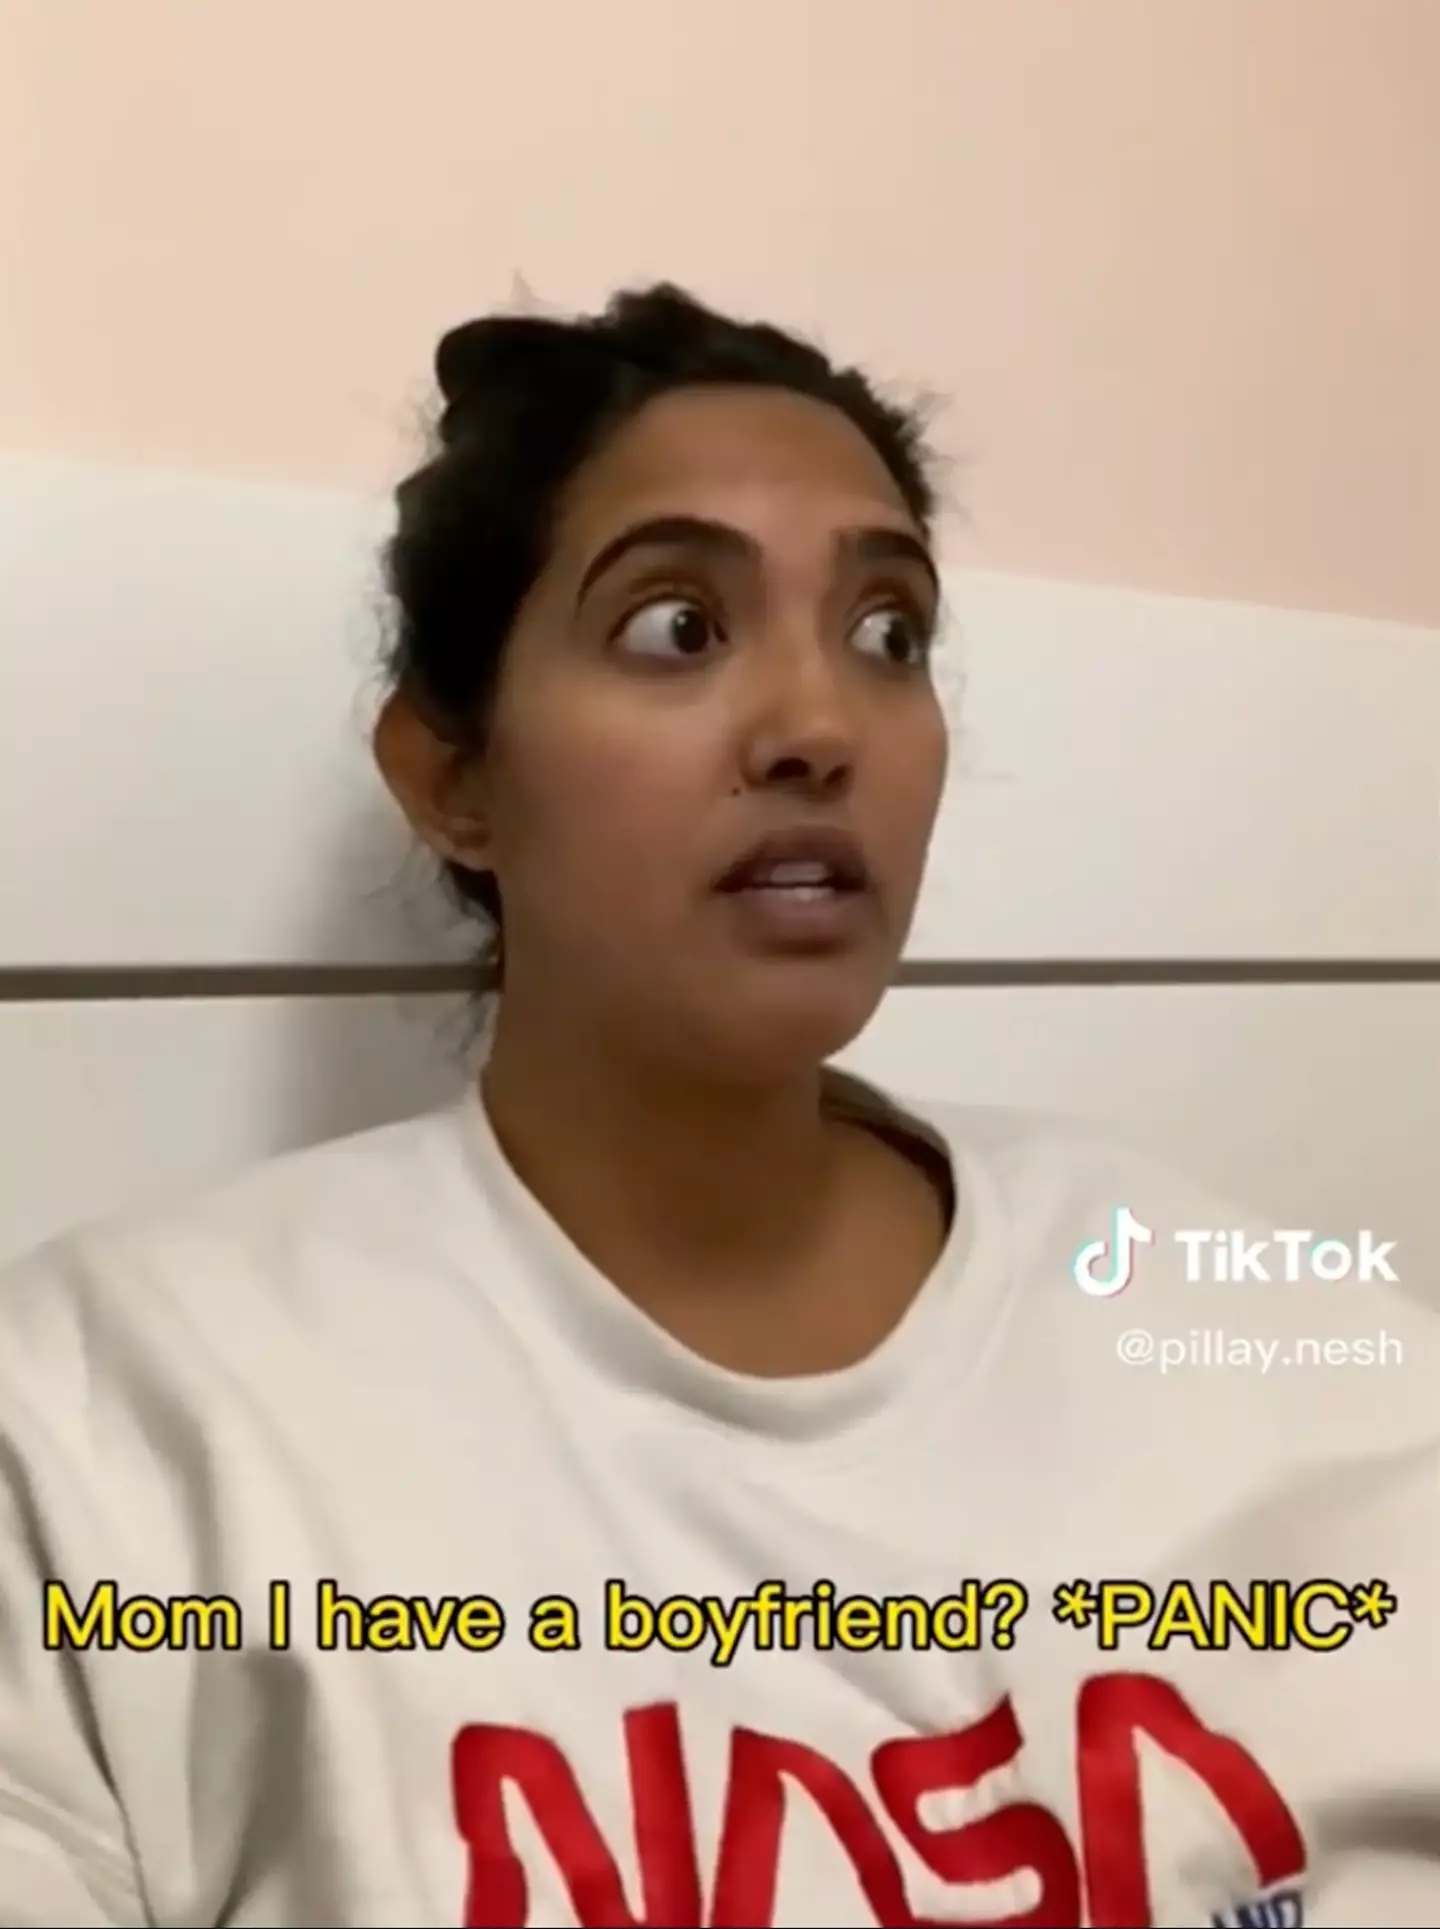 She filmed the moment she was told she has a boyfriend.